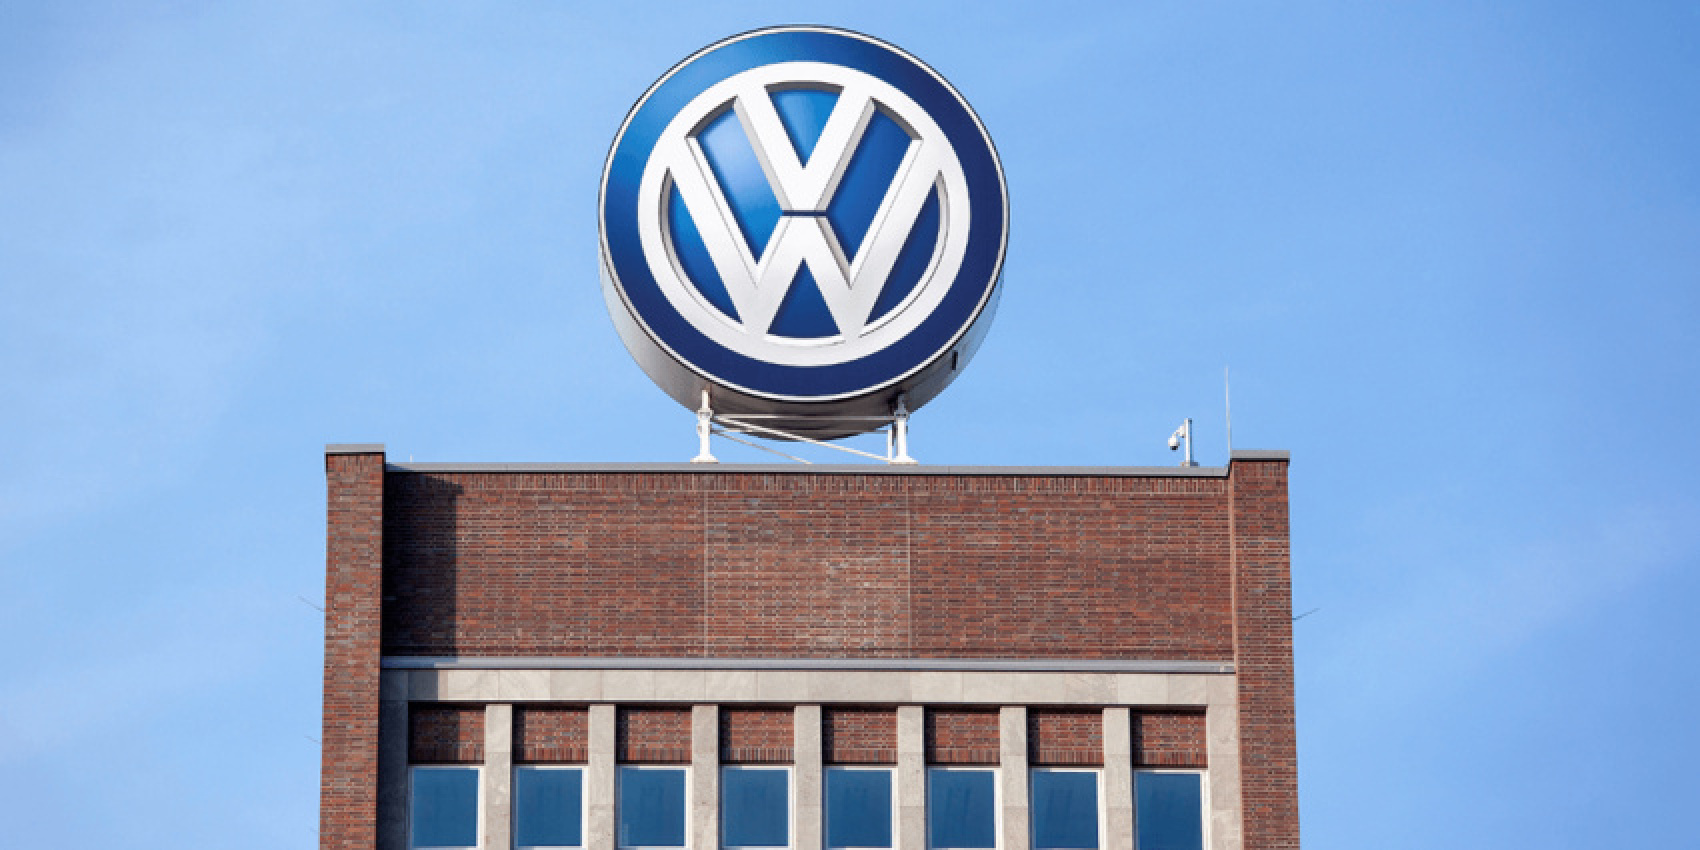 automobile, autos, cars, electric vehicle, germany, trinity, volkswagen, wolfsburg, vw to build trinity plant in wolfsburg